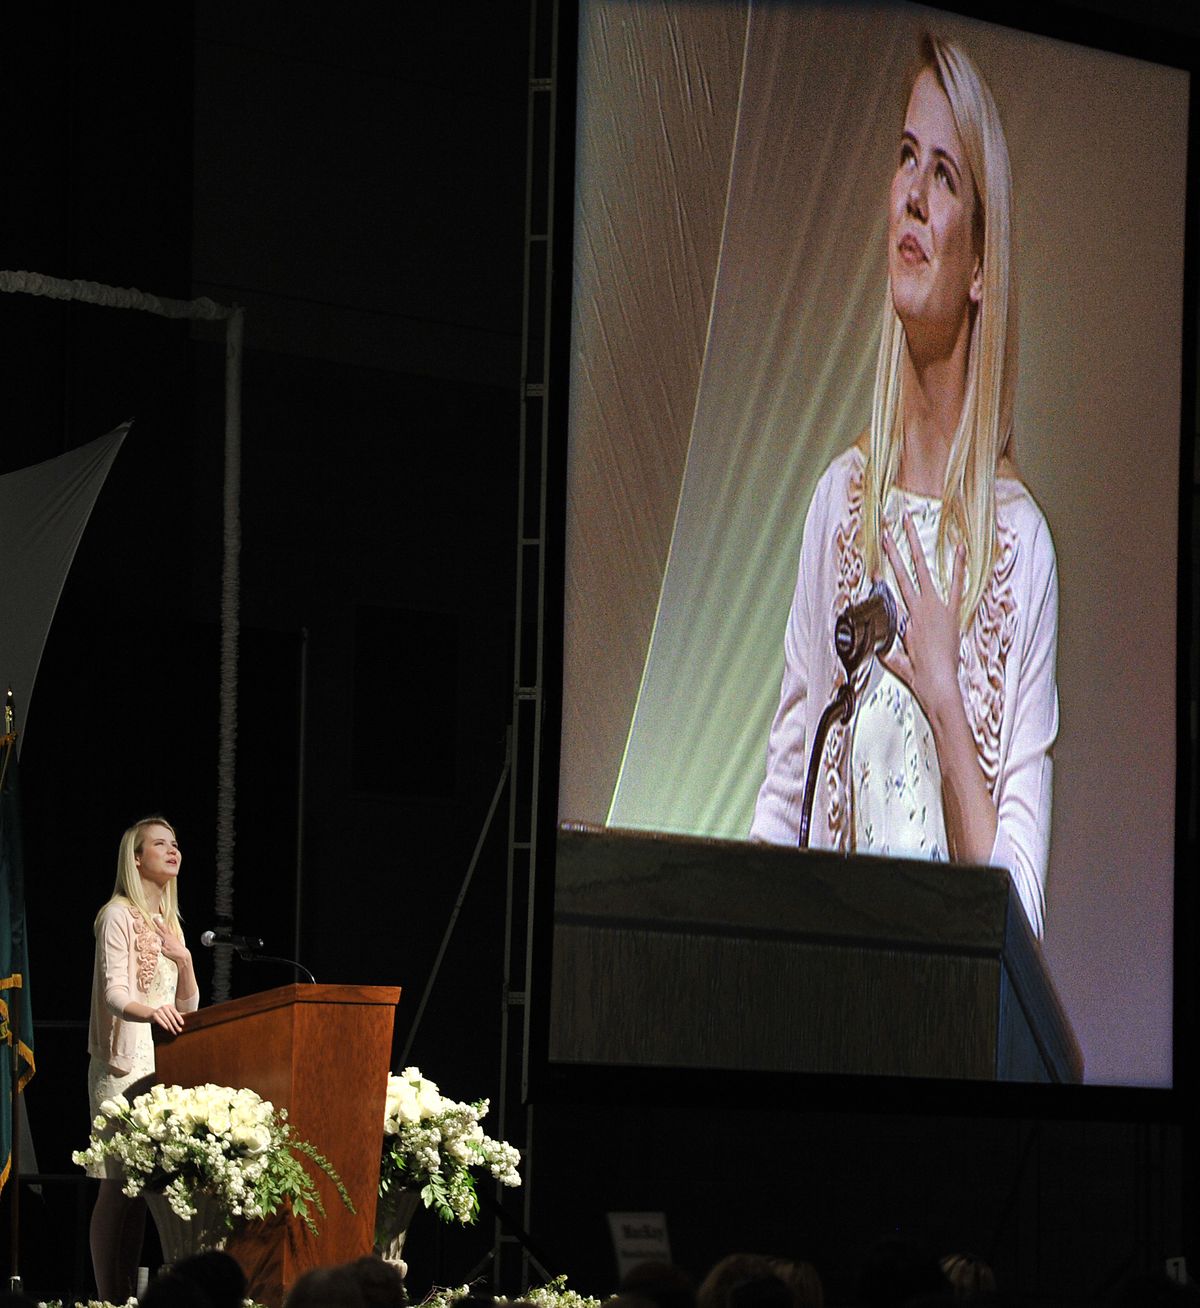 Elizabeth Smart shares her story of being kidnapped and assaulted when she was 14 years old with the crowd gathered at the Spokane Convention Center for the Women Helping Women Fund luncheon. (Dan Pelle)